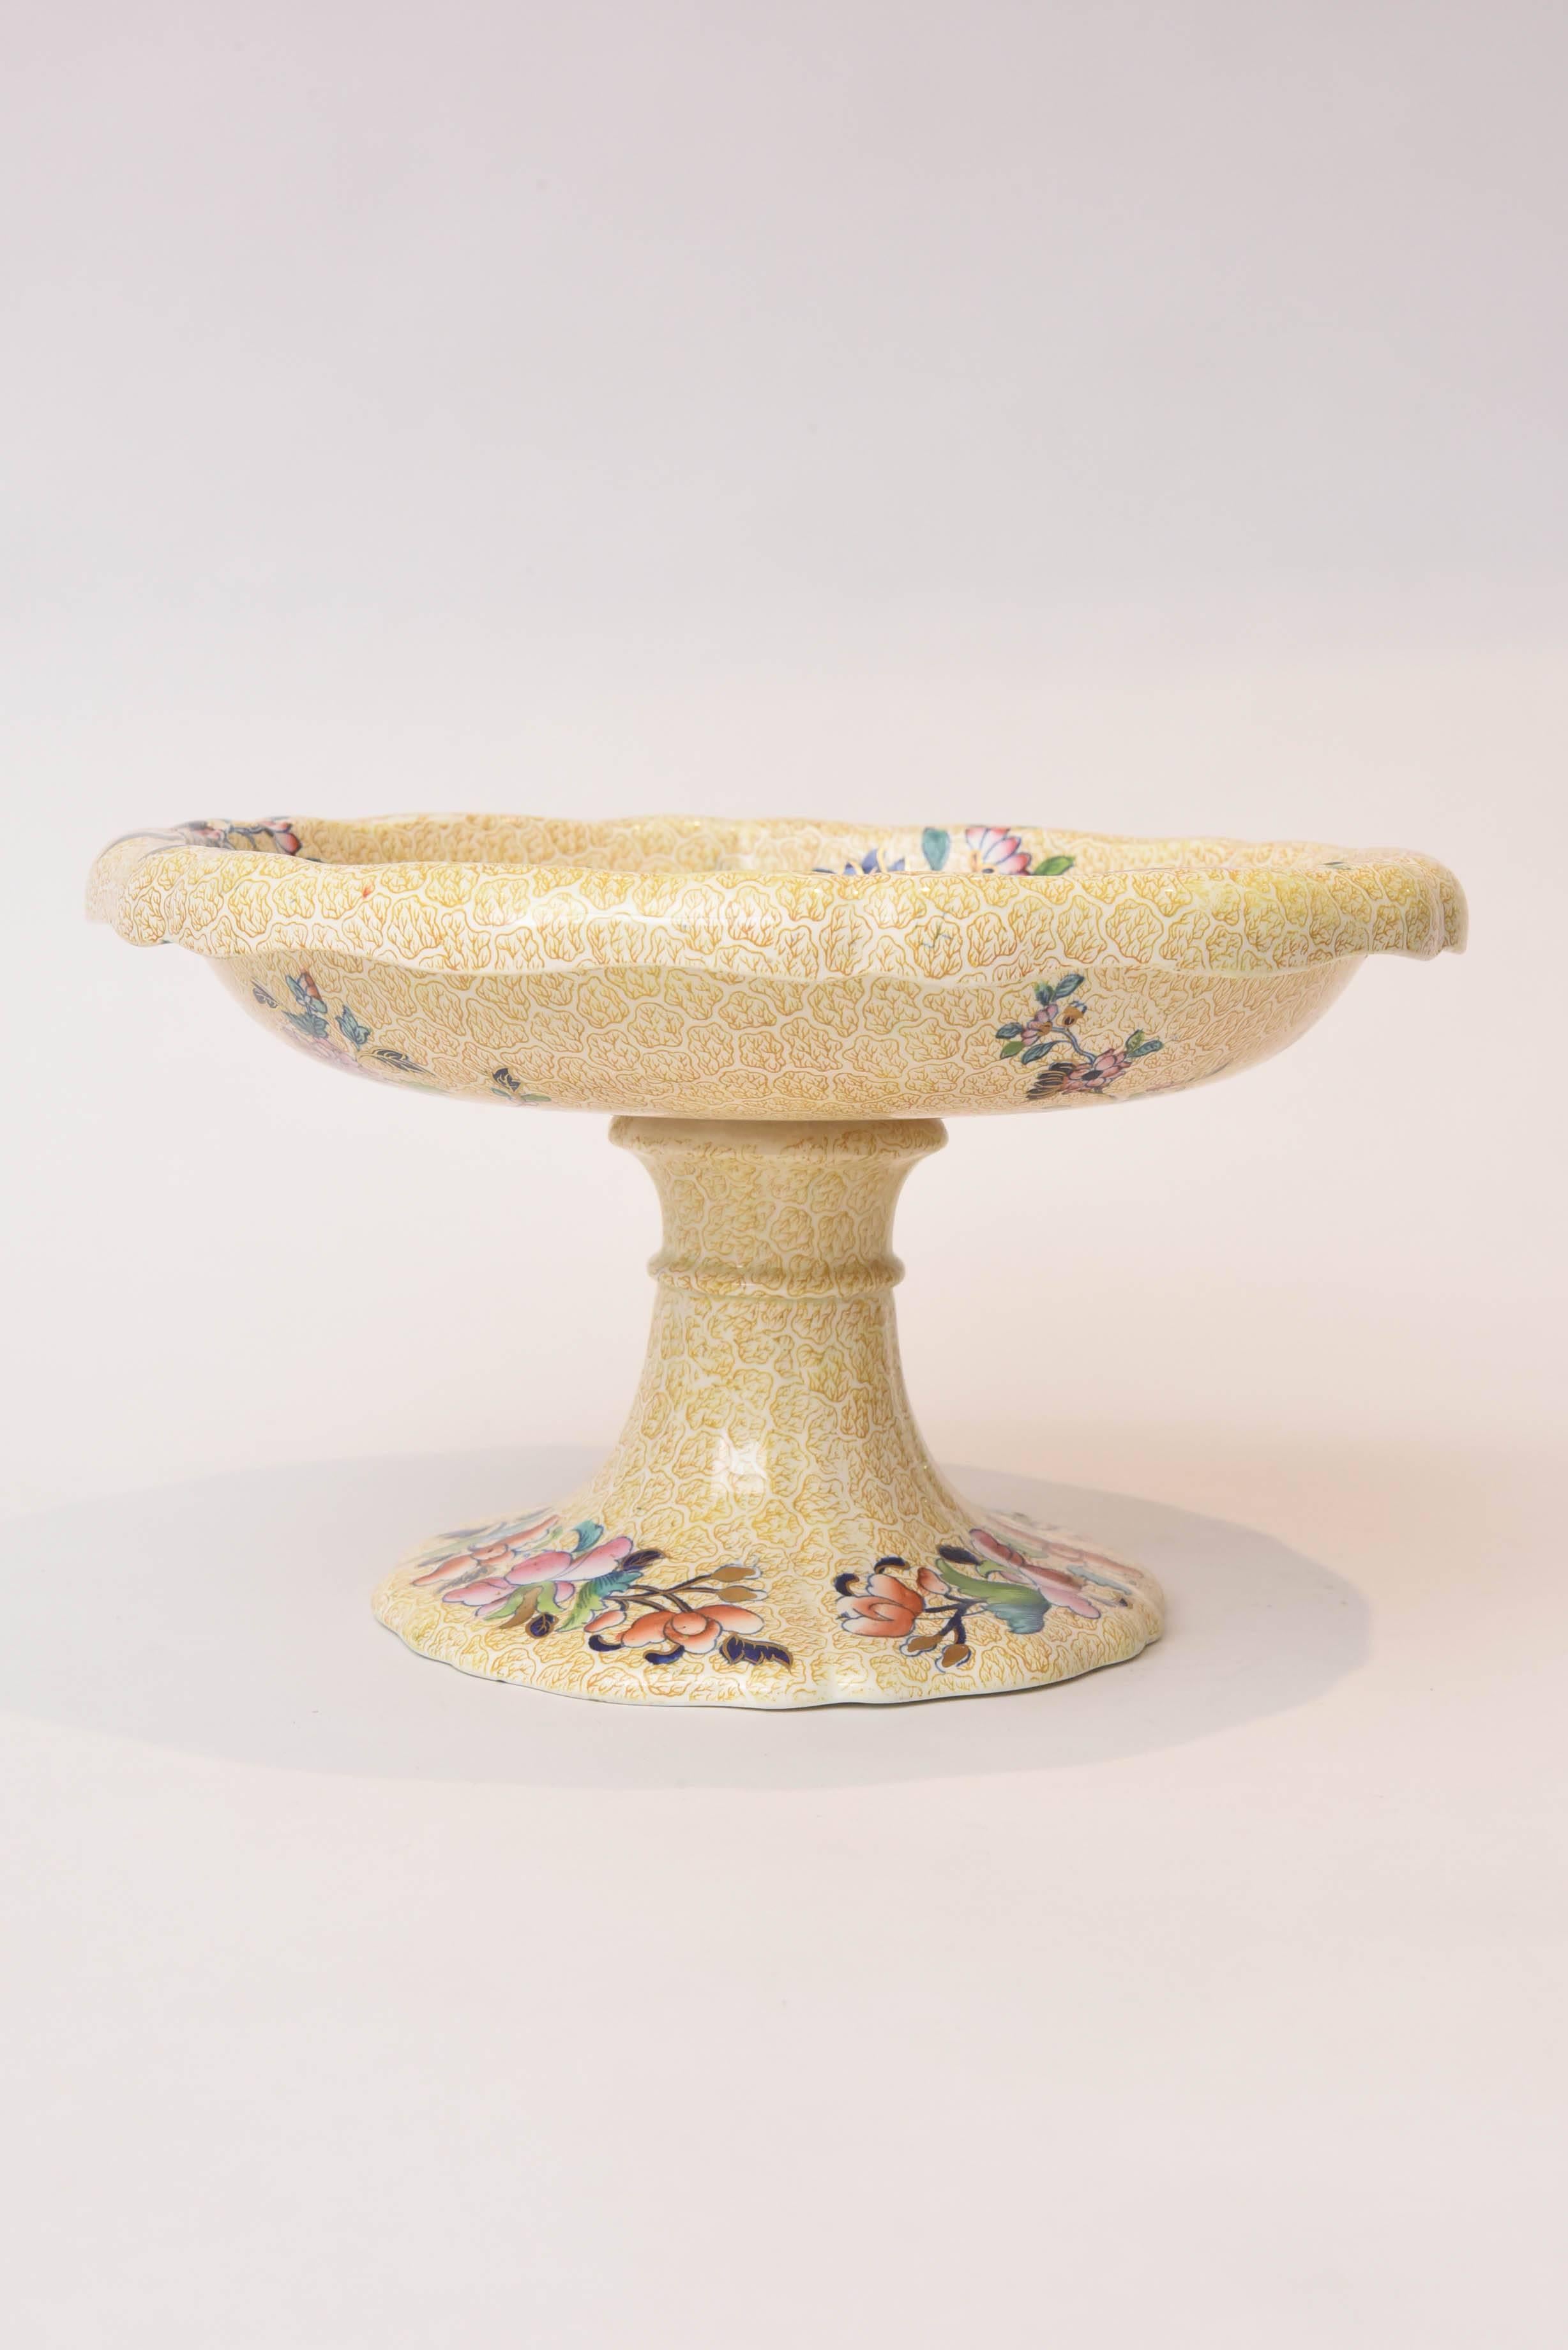 A Copeland Spode centerpiece compote in a charming version of their peacock and parsley design, circa 1820. Featuring an all-over scroll on a buttercream yellow ground and vibrant pattern through the center, base and even underneath the bowl. In